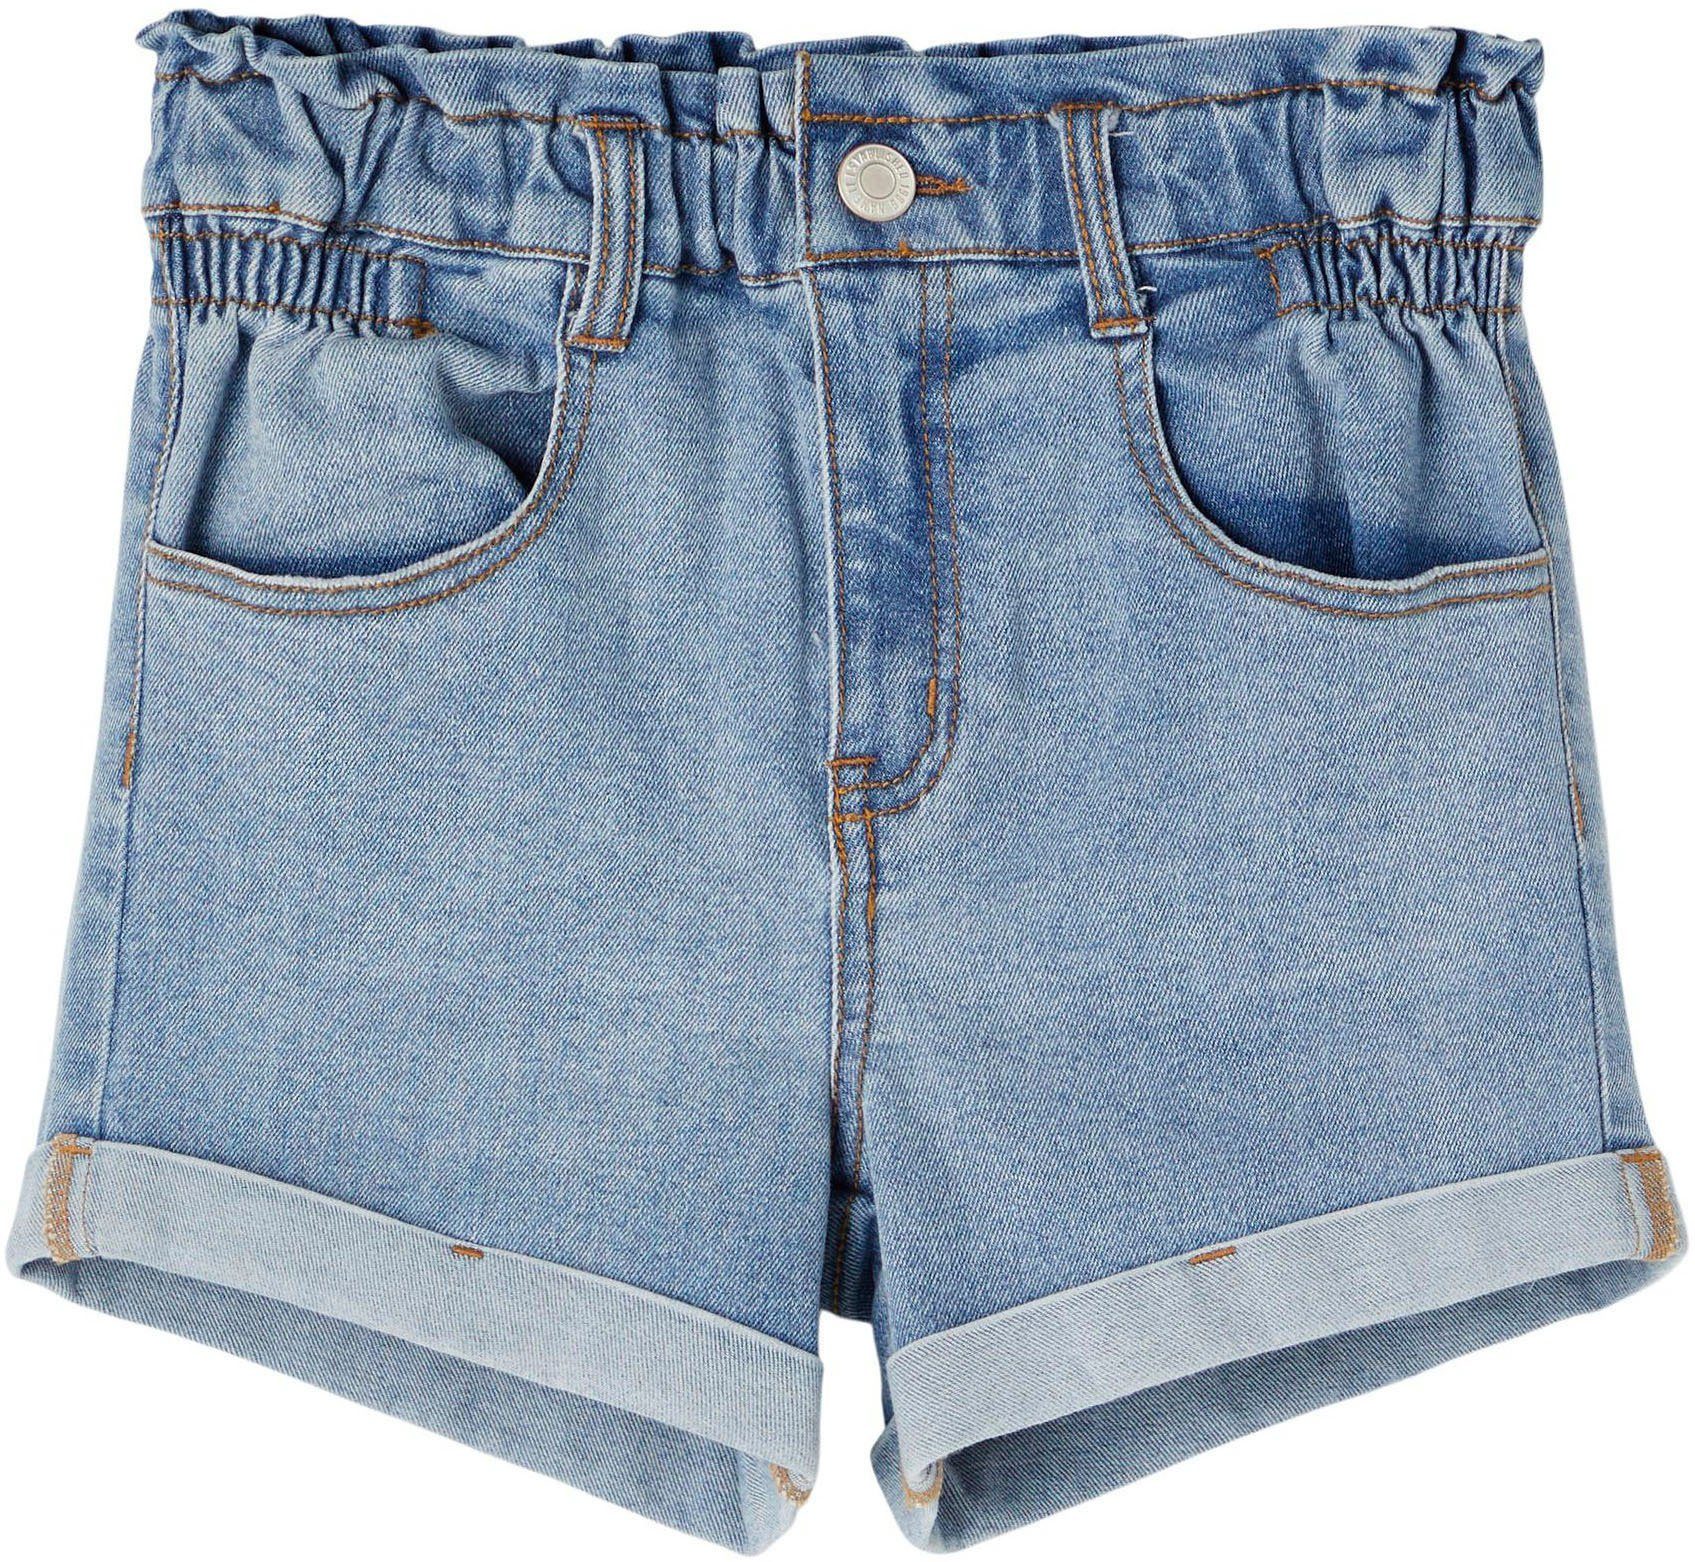 DNMTAZZA Name (Packung) It NKFBELLA Jeansshorts